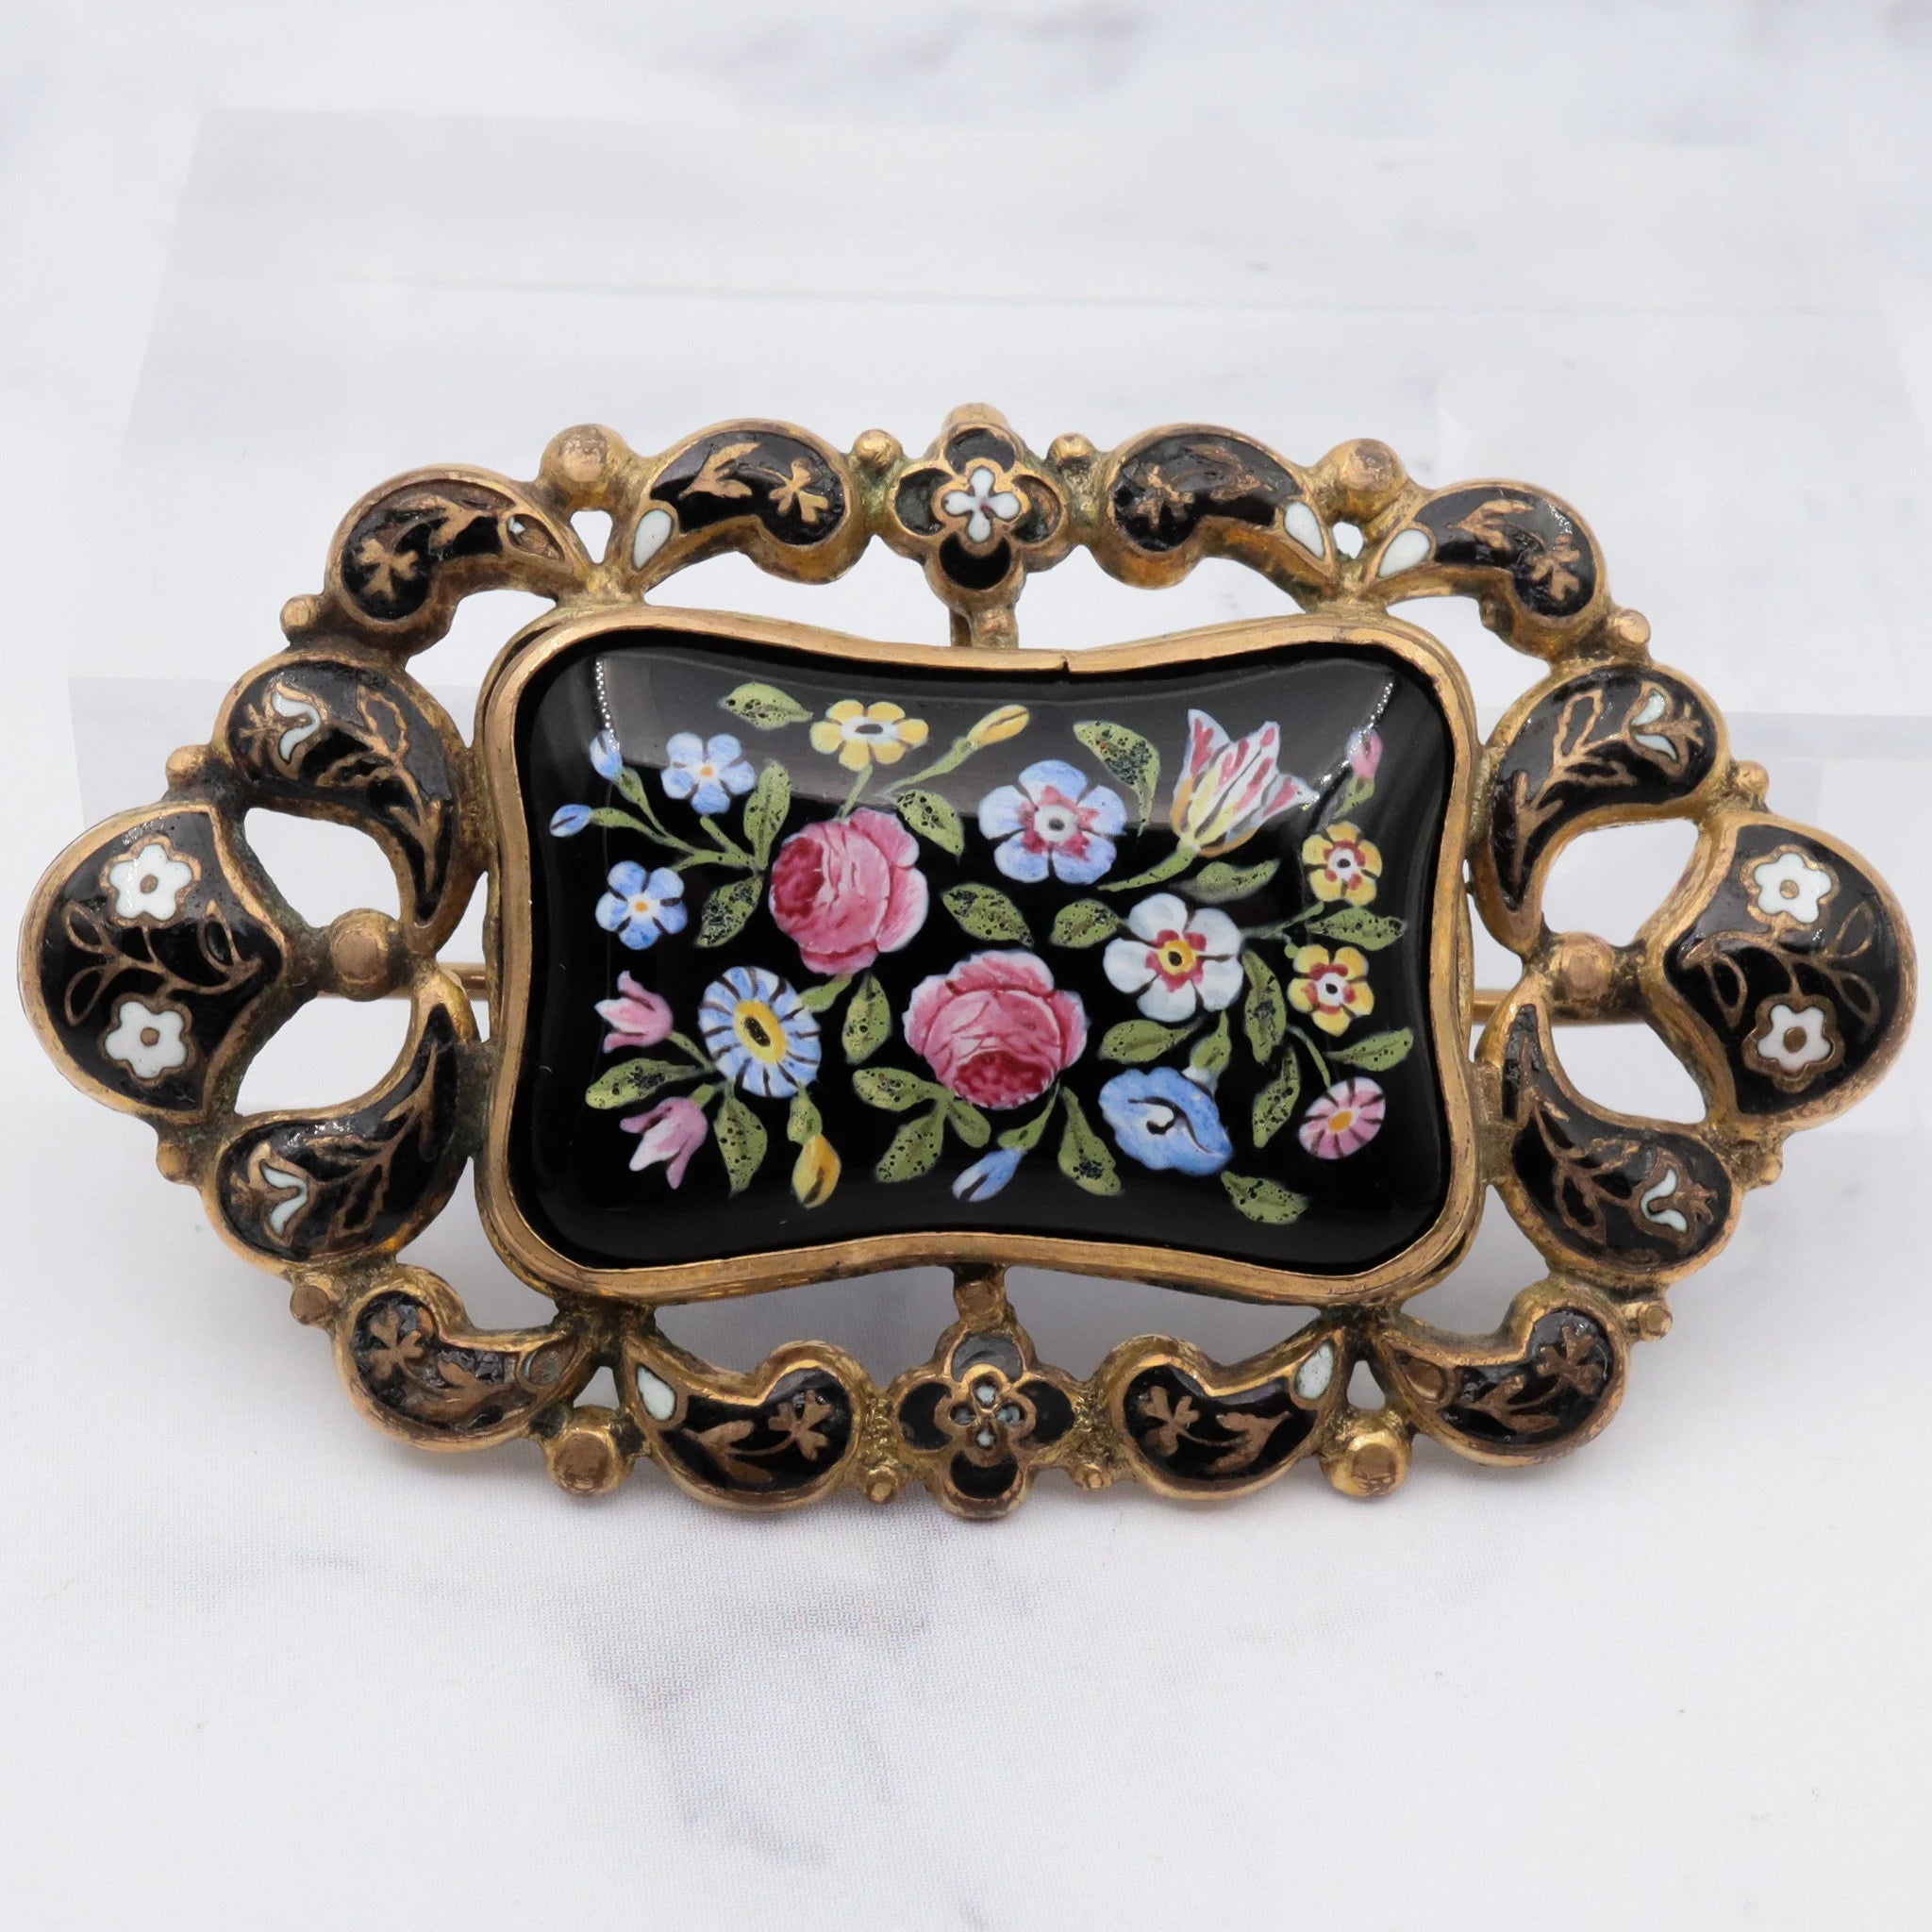 Antique victorian gold filled hand painted black and floral enamel brooch